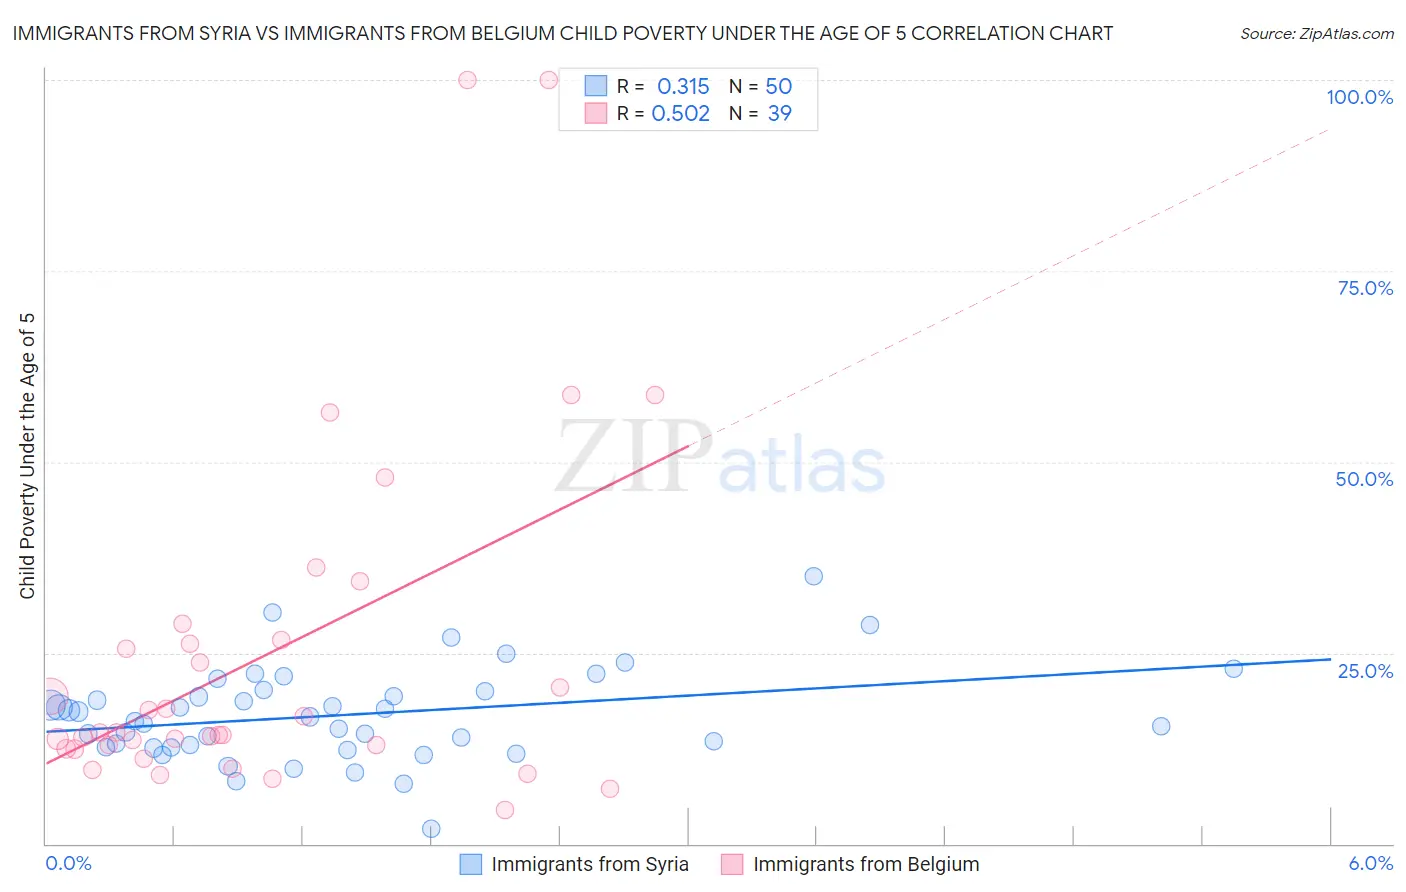 Immigrants from Syria vs Immigrants from Belgium Child Poverty Under the Age of 5